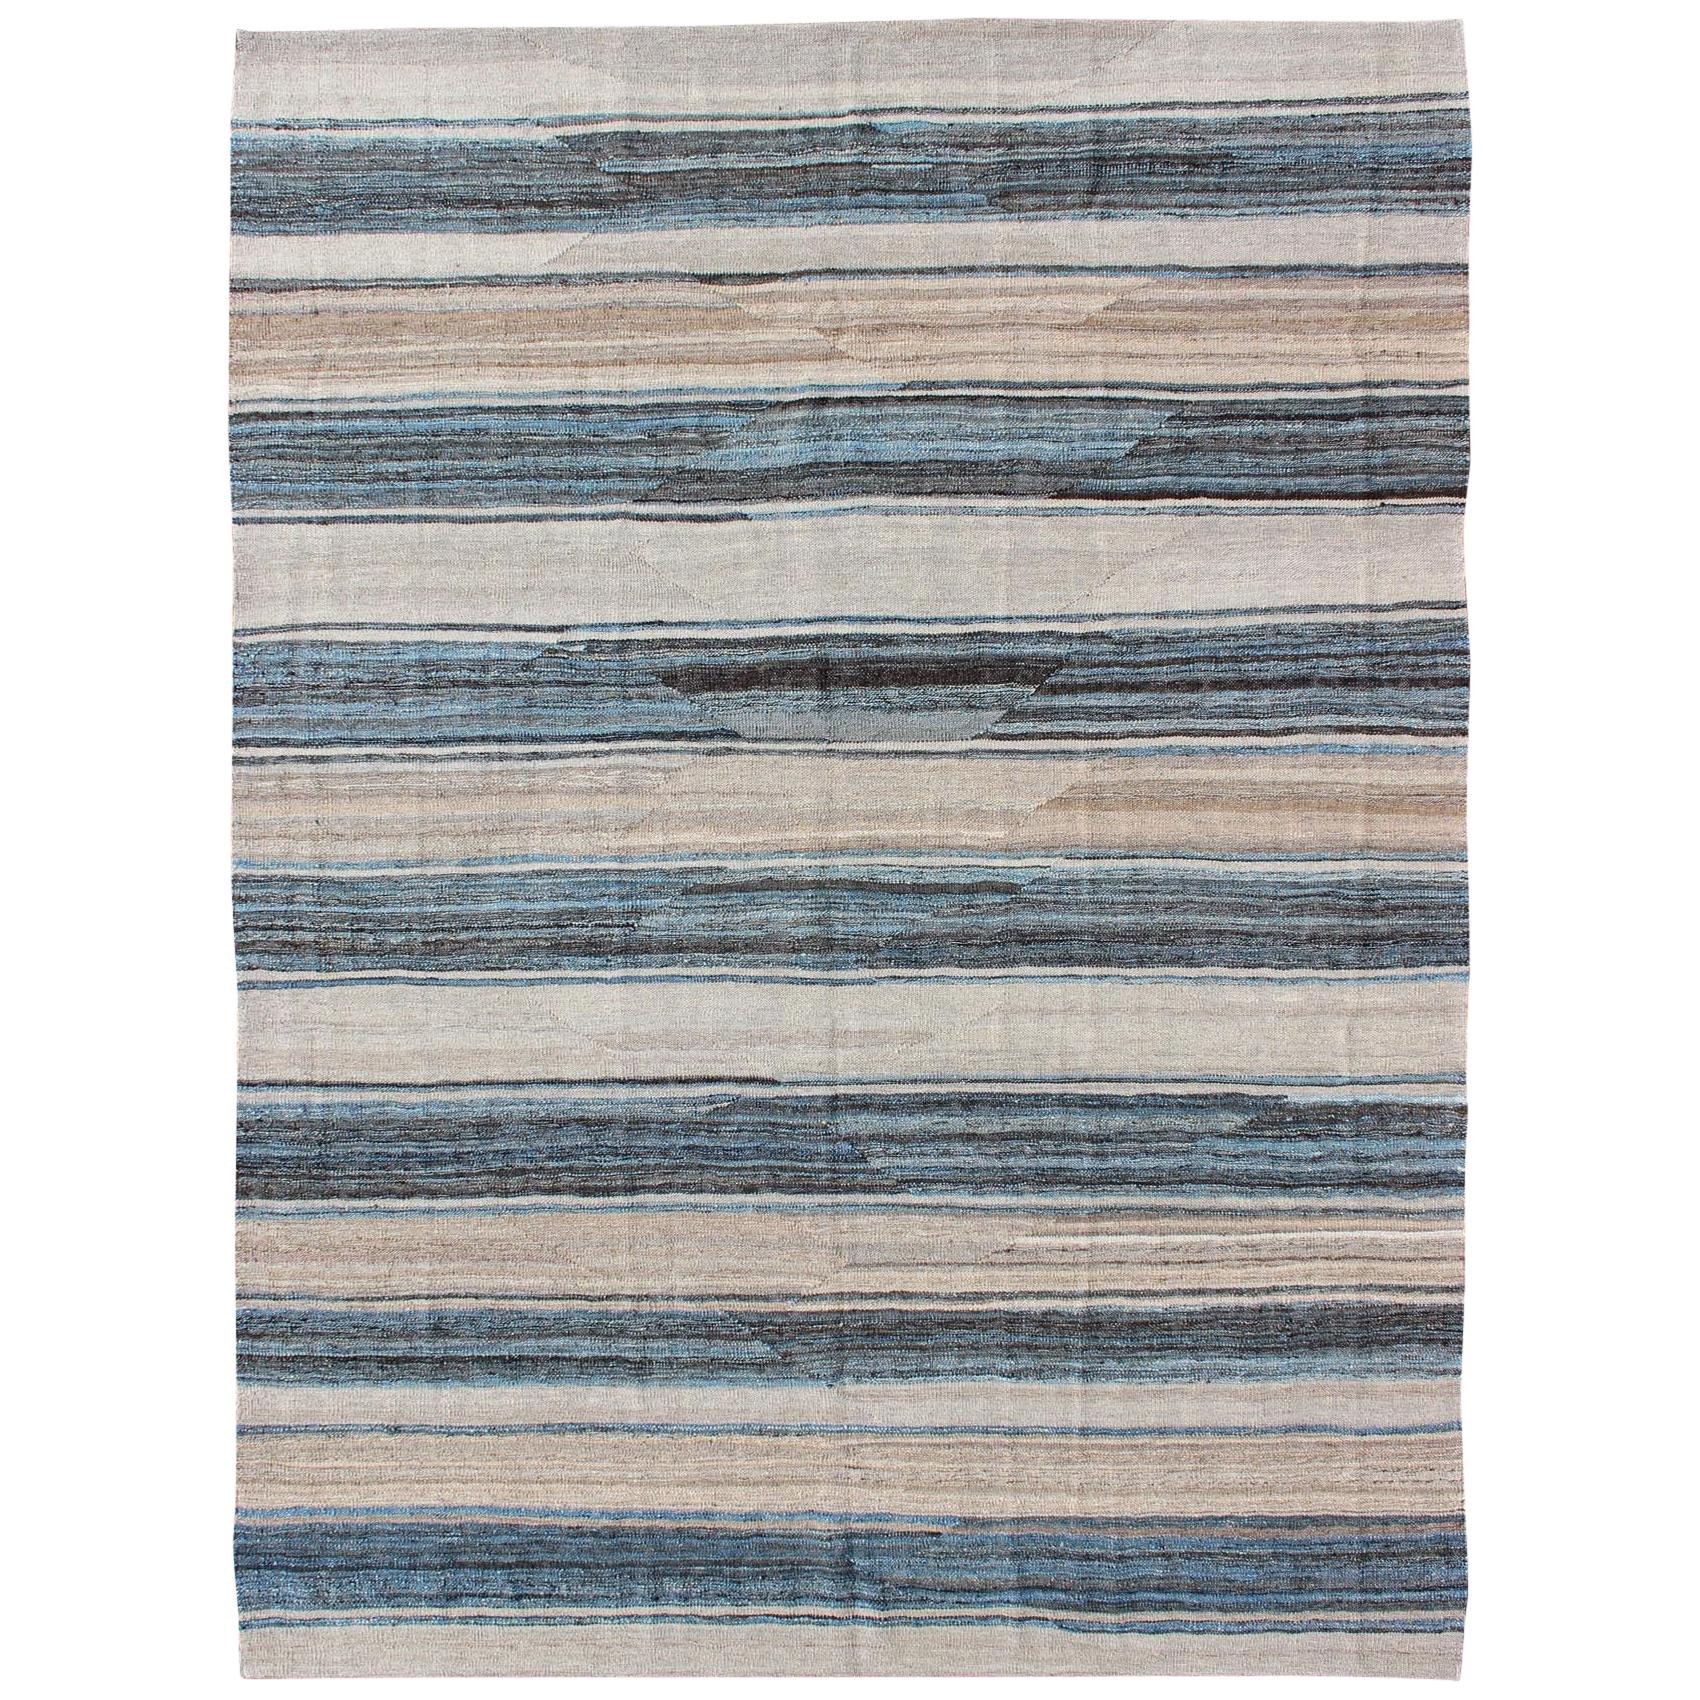 Flat-Weave Modern Kilim Rug with Stripes in Shades of Blue, Charcoal and Ivory